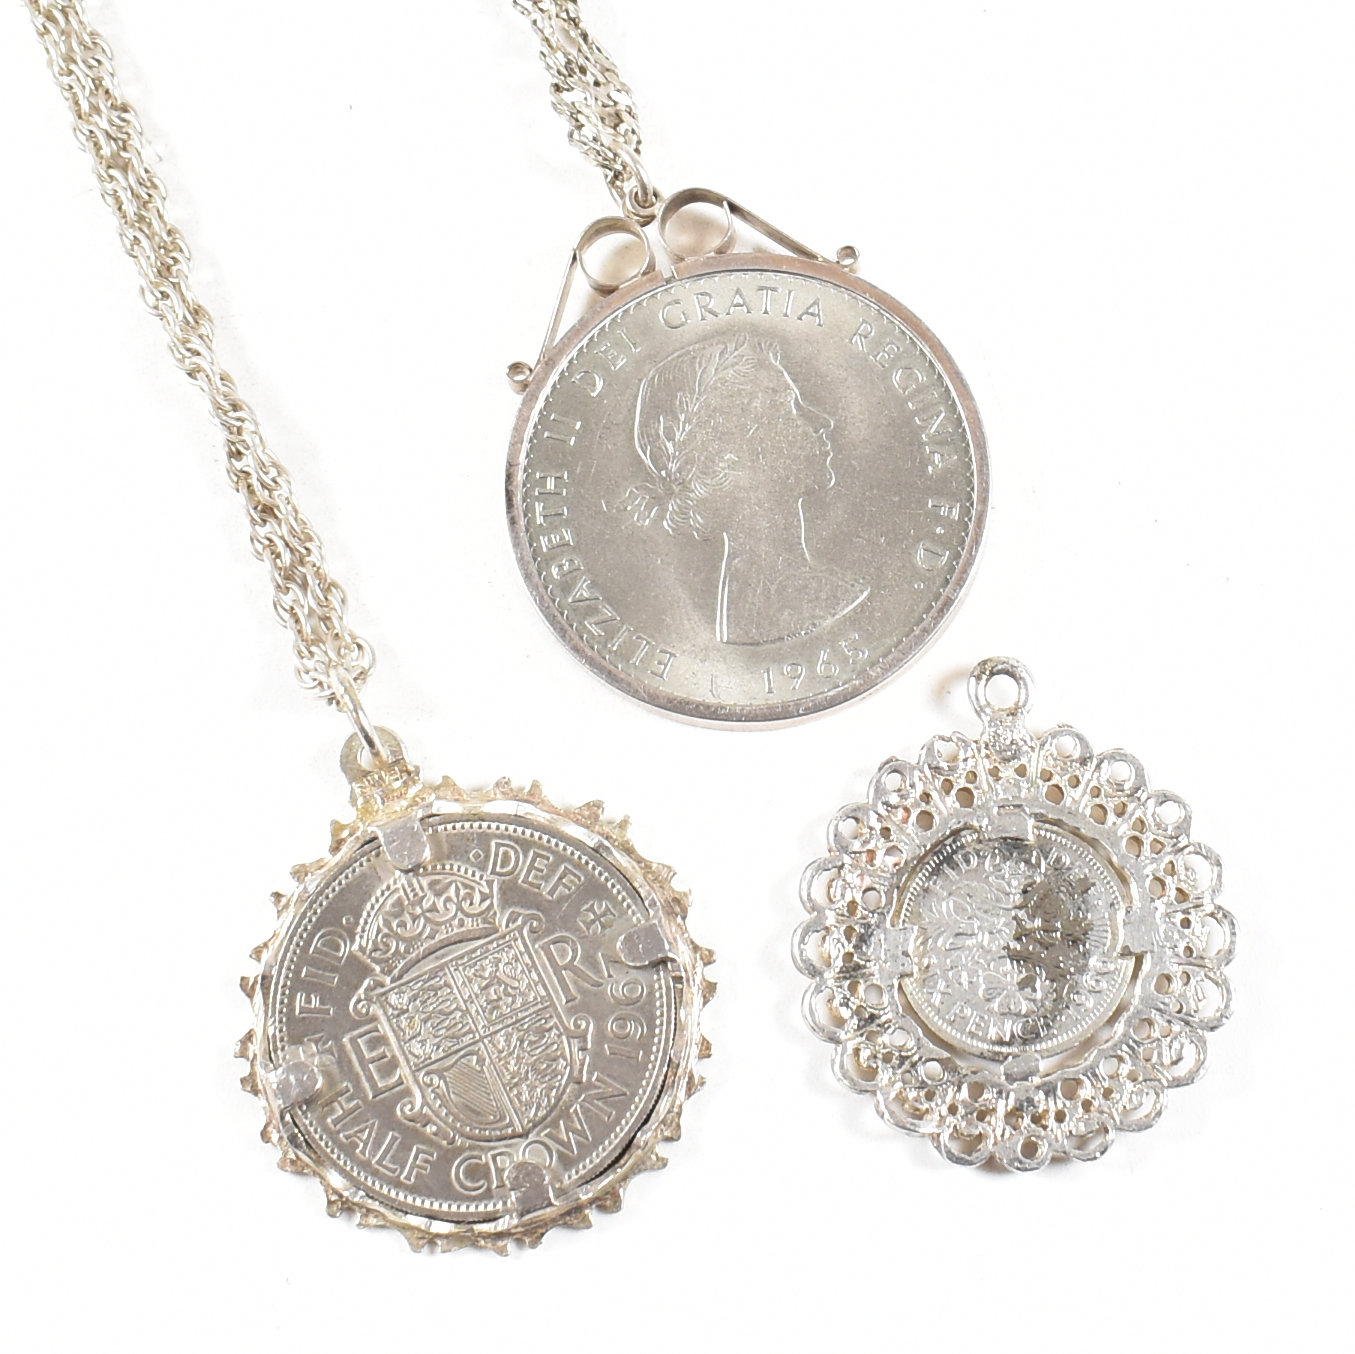 COLLECTION OF MOUNTED COIN PENDANT NECKLACES & PENDANT - Image 2 of 4